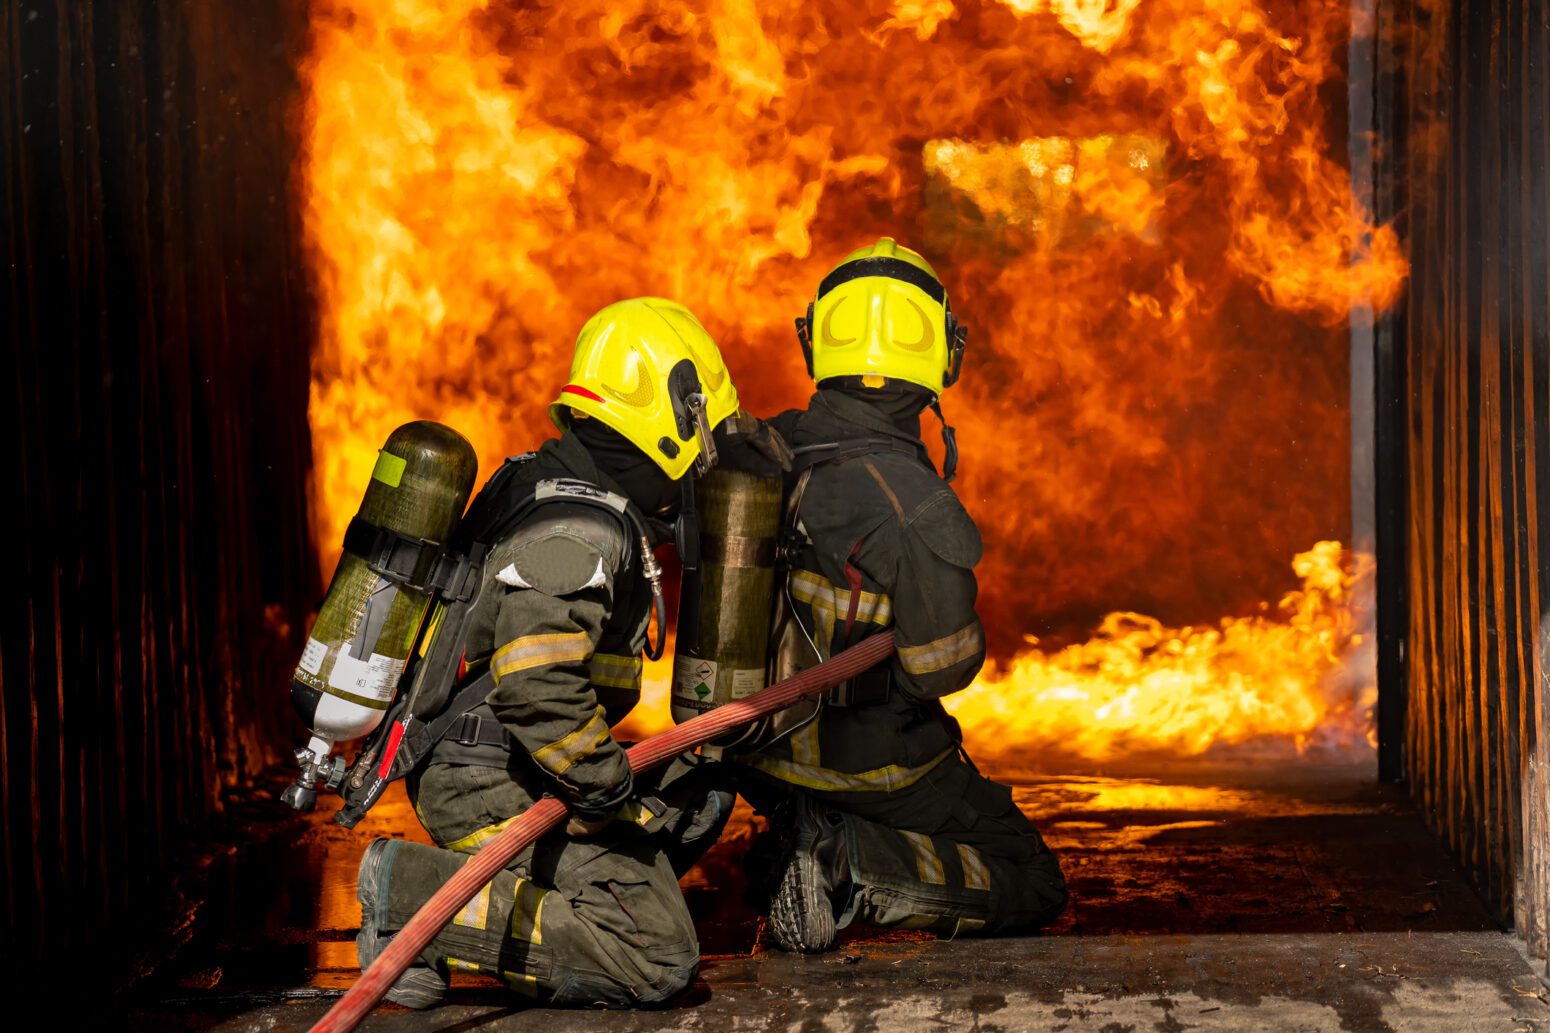 Paint Factory Fire: A reminder on how to stay safe when working with Solvents, Chemicals and Fumes